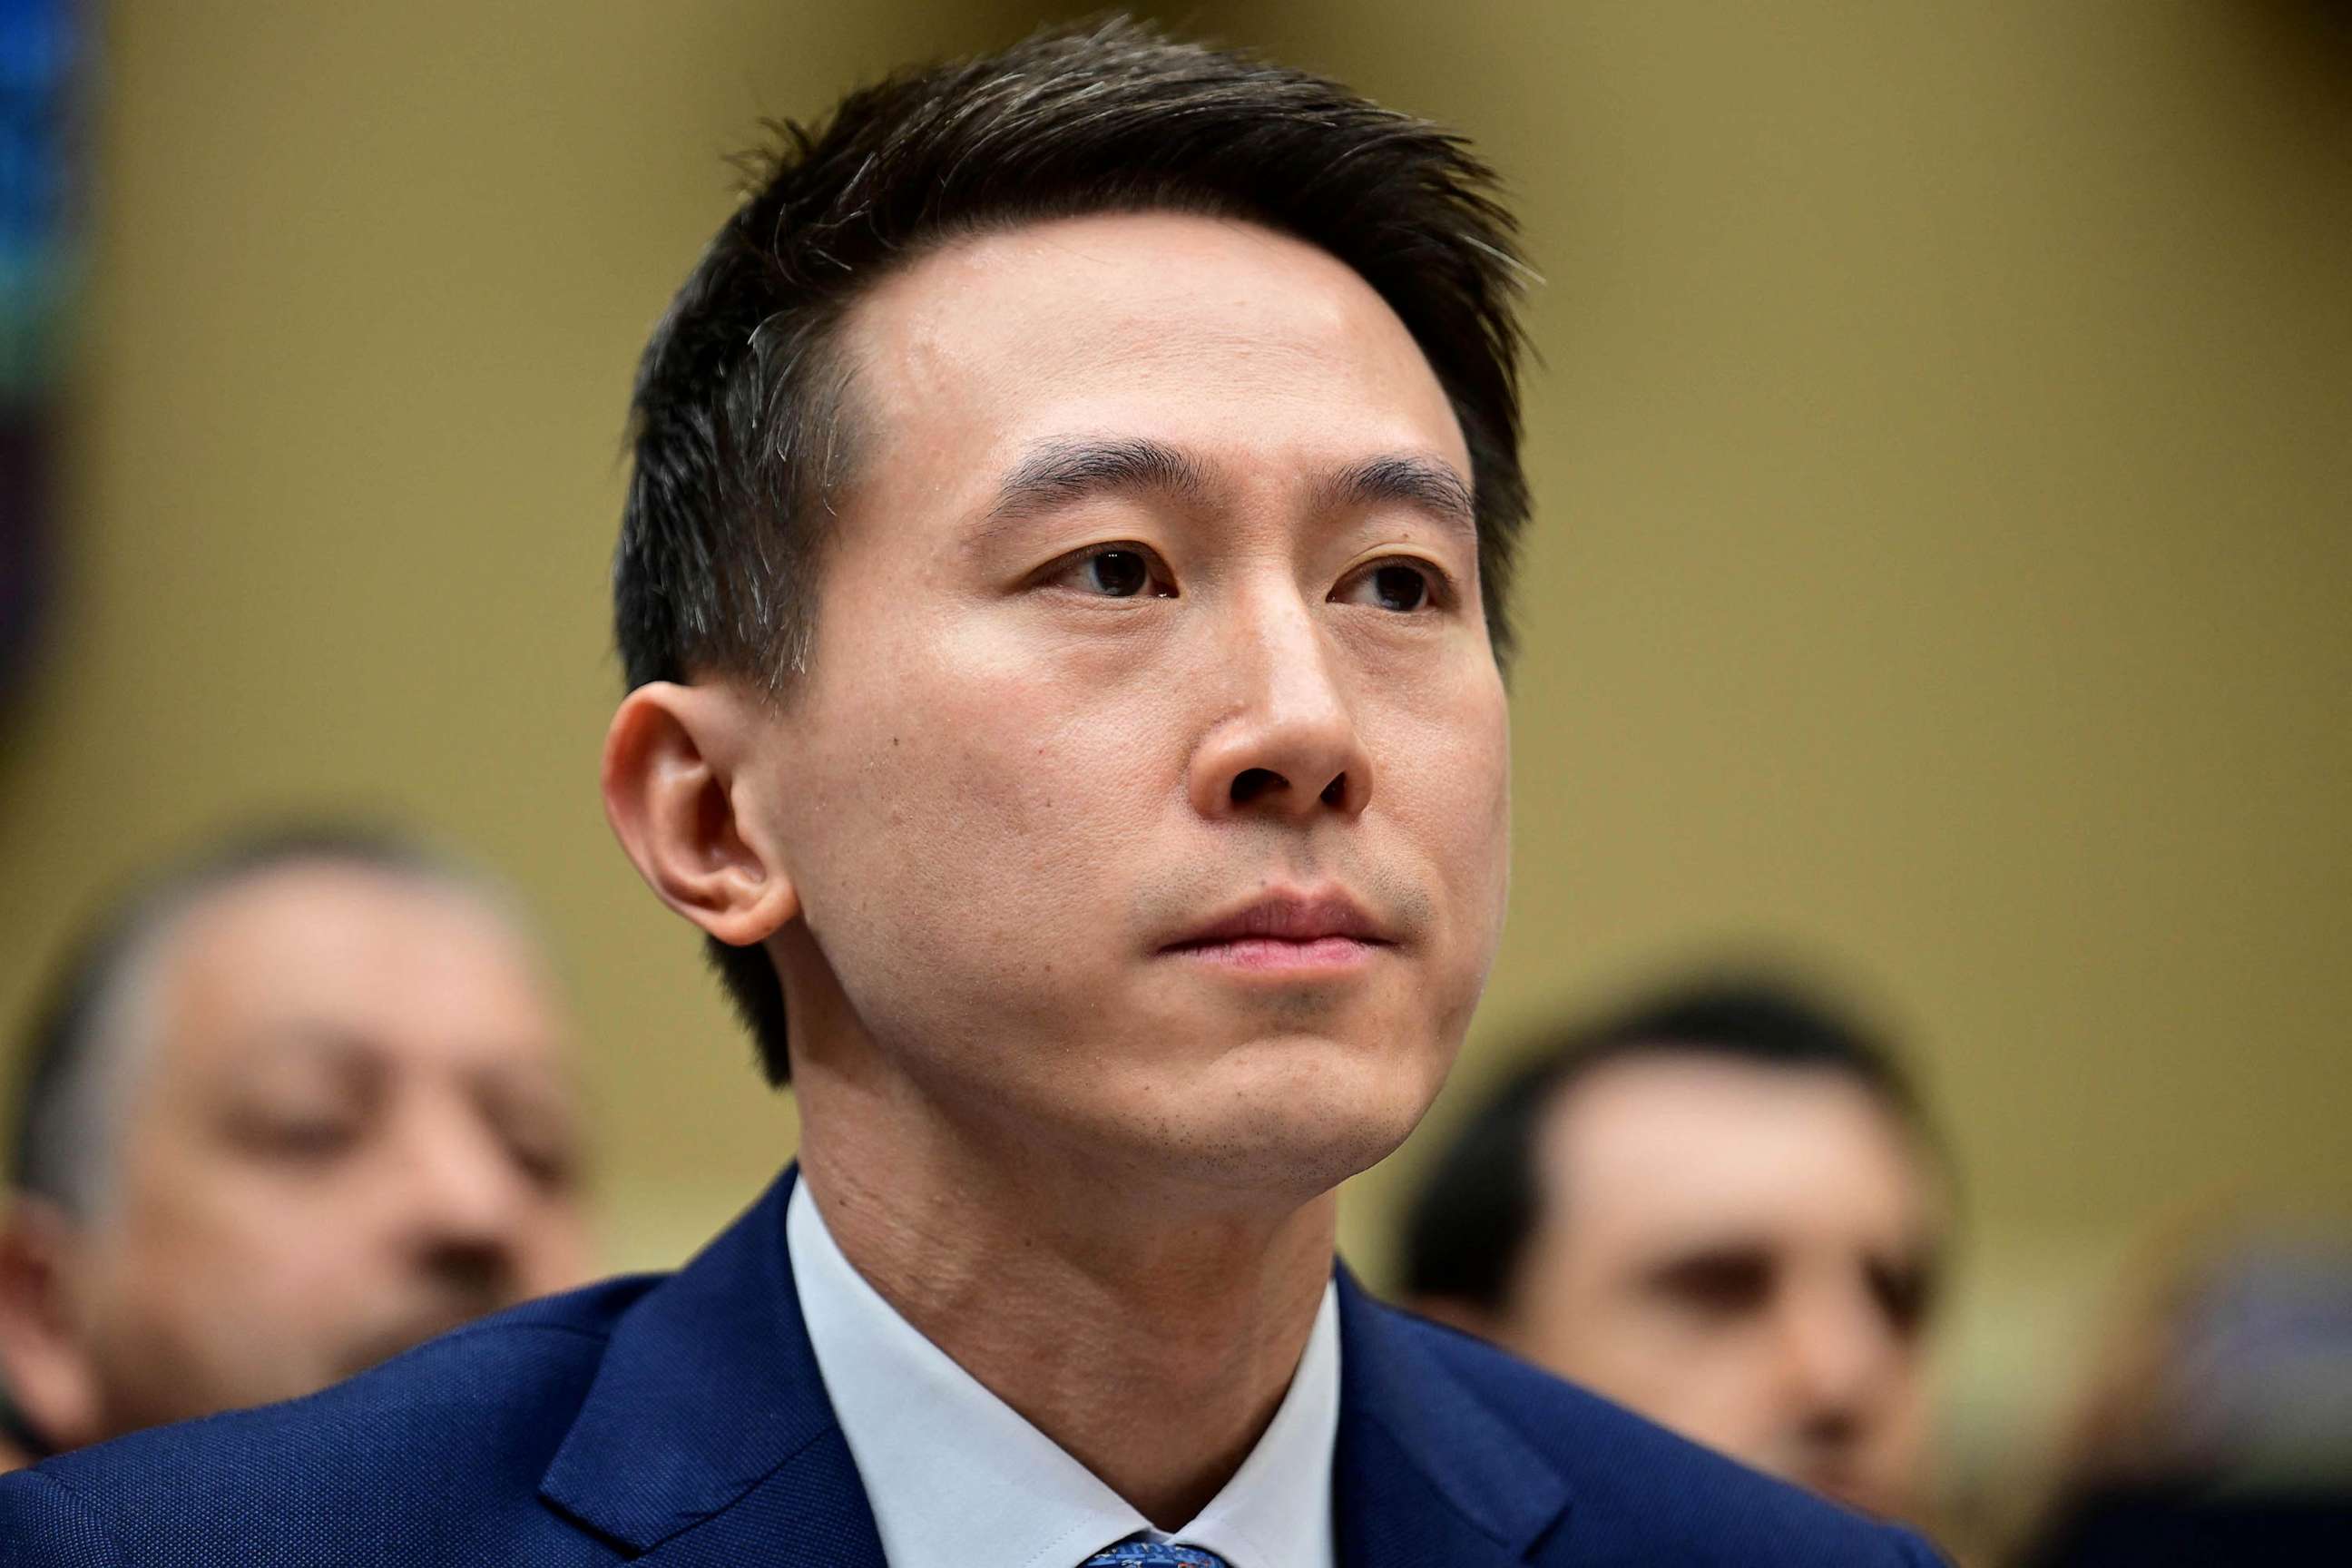 PHOTO: TikTok CEO Shou Zi Chew prepares to testify before the House Energy and Commerce Committee hearing on Capitol Hill, March 23, 2023, in Washington, DC.